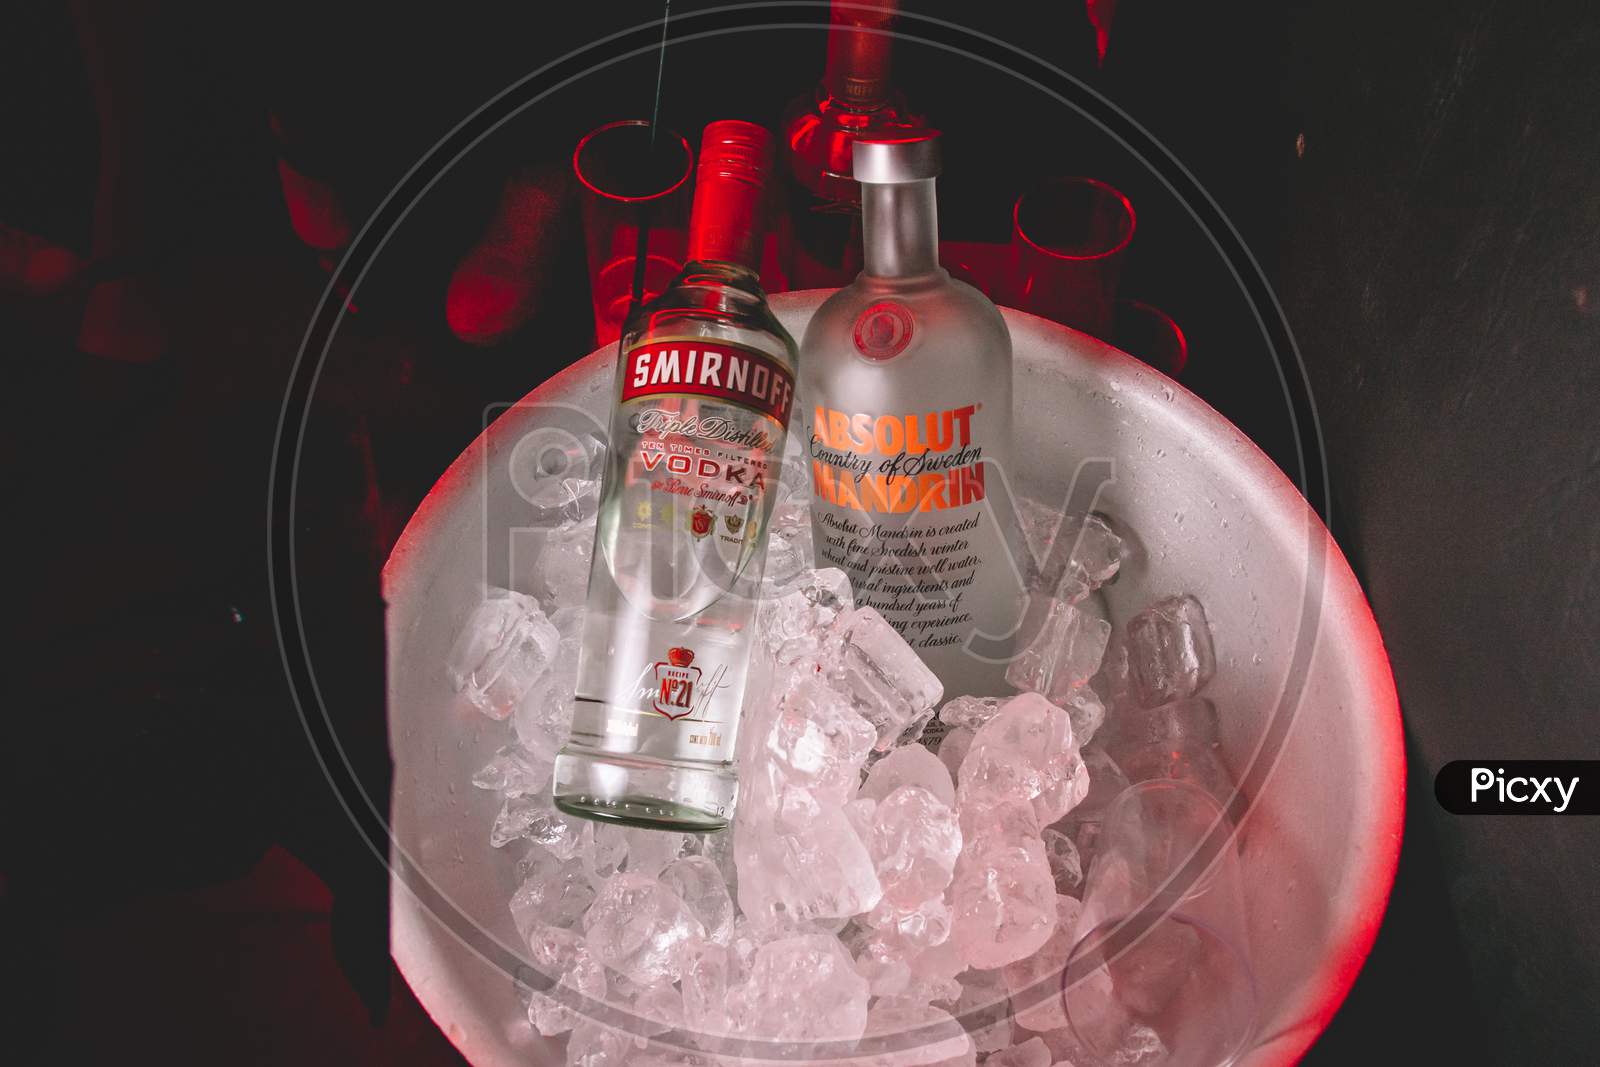 Two Bottles Of Smirnoff And Absolut Vodka In A Bowl With Ice